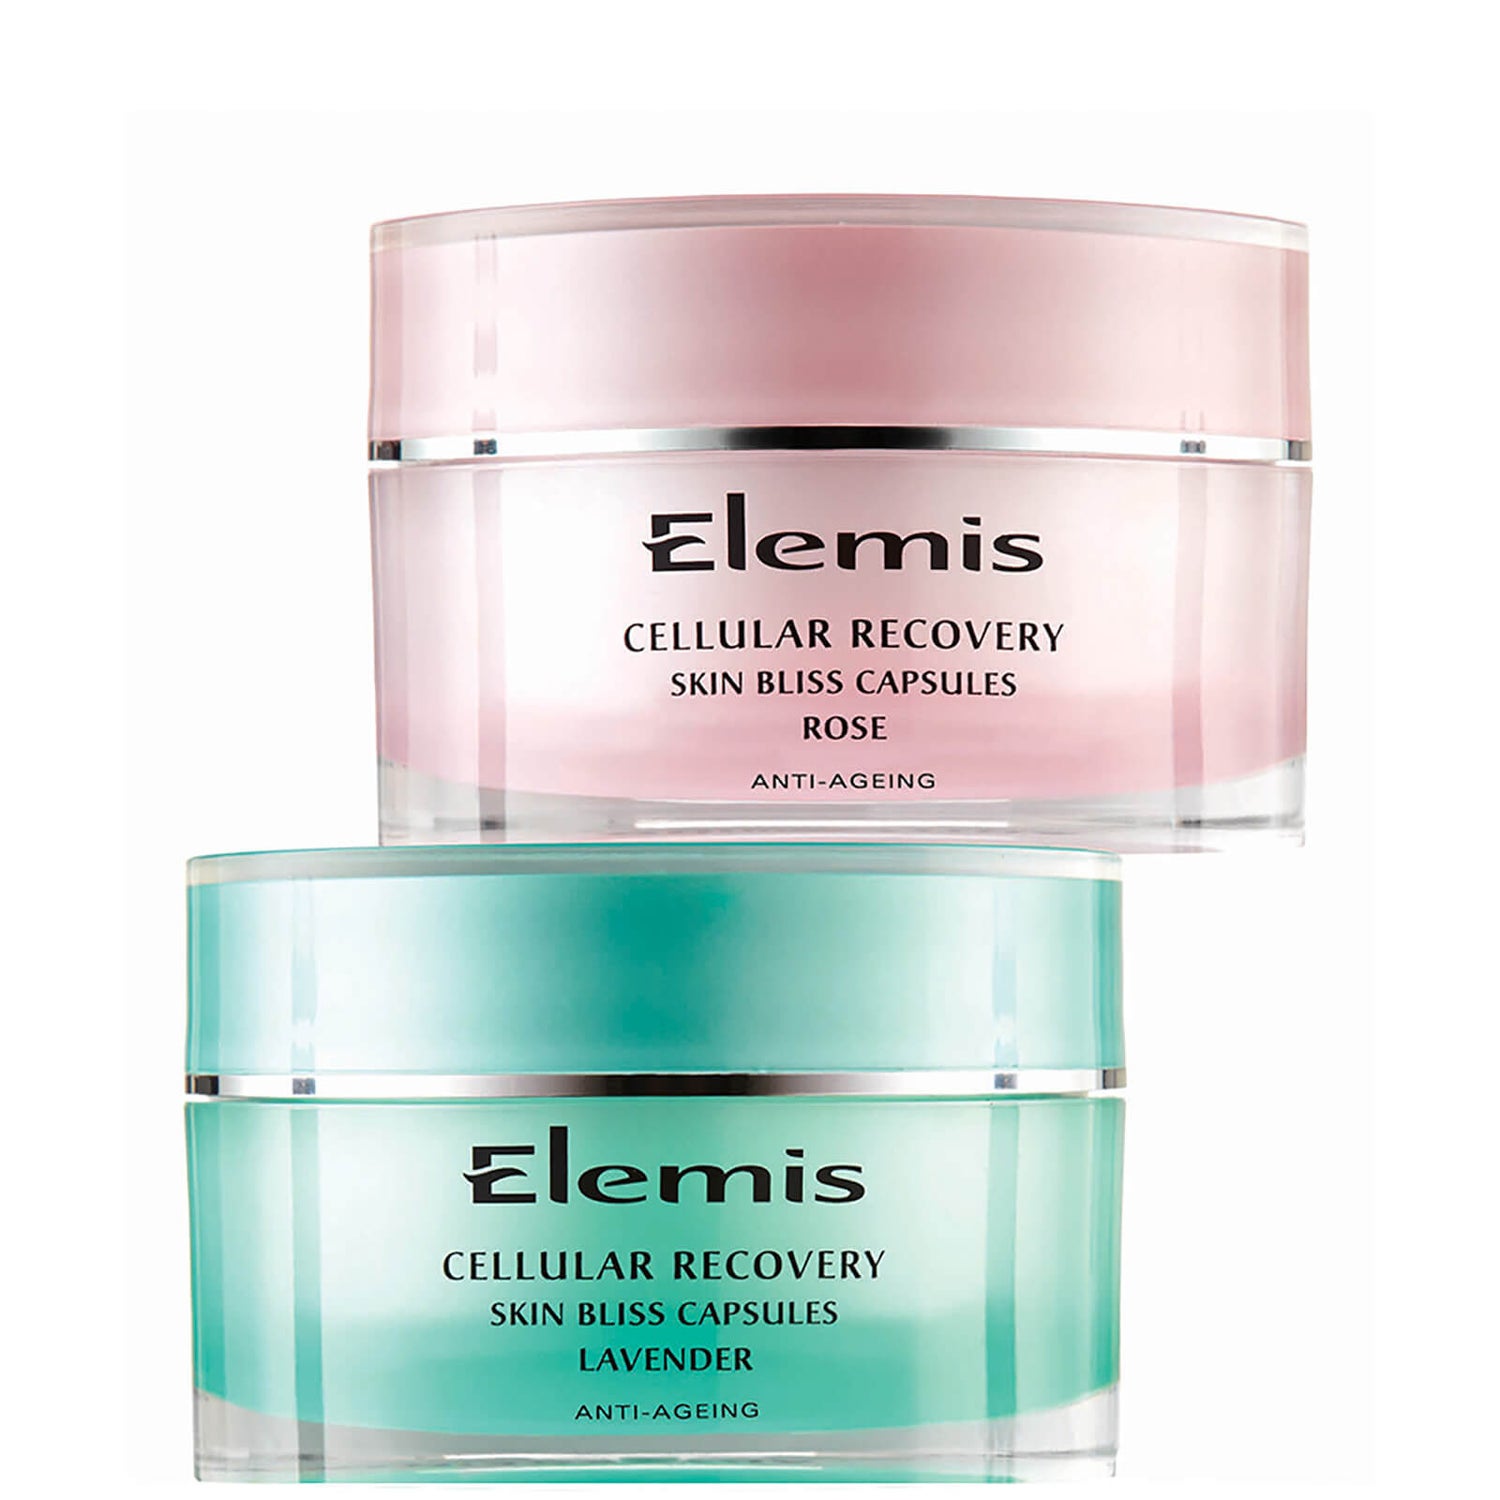 Elemis Cellular Recovery Anniversary Collection (verdt 140,70 pund)